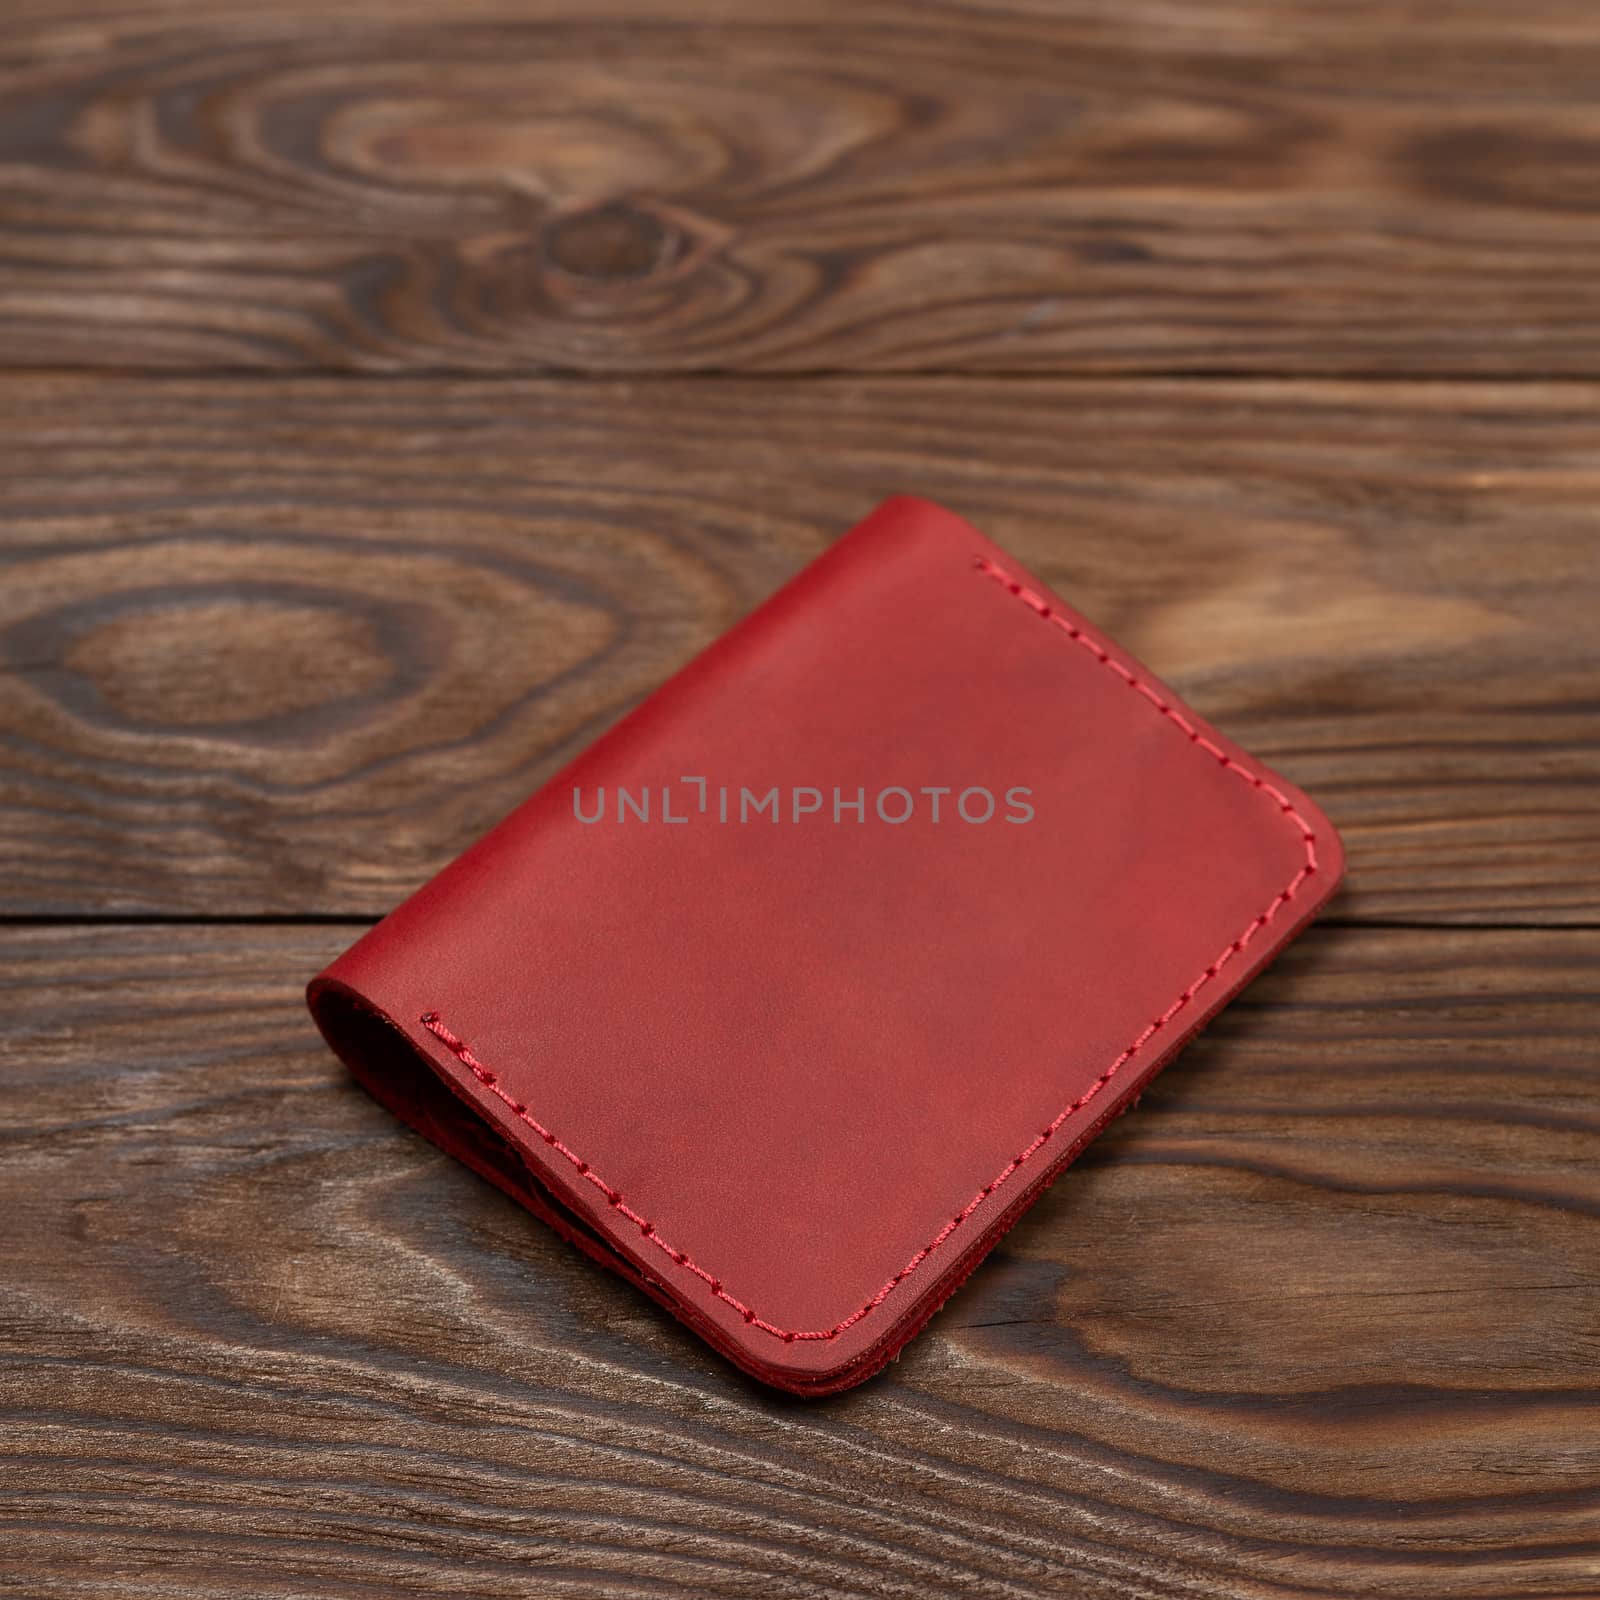 Red two-pocket closed leather handmade cardholder lies on wooden background. Soft focus on background. Stock photo on blurred background.